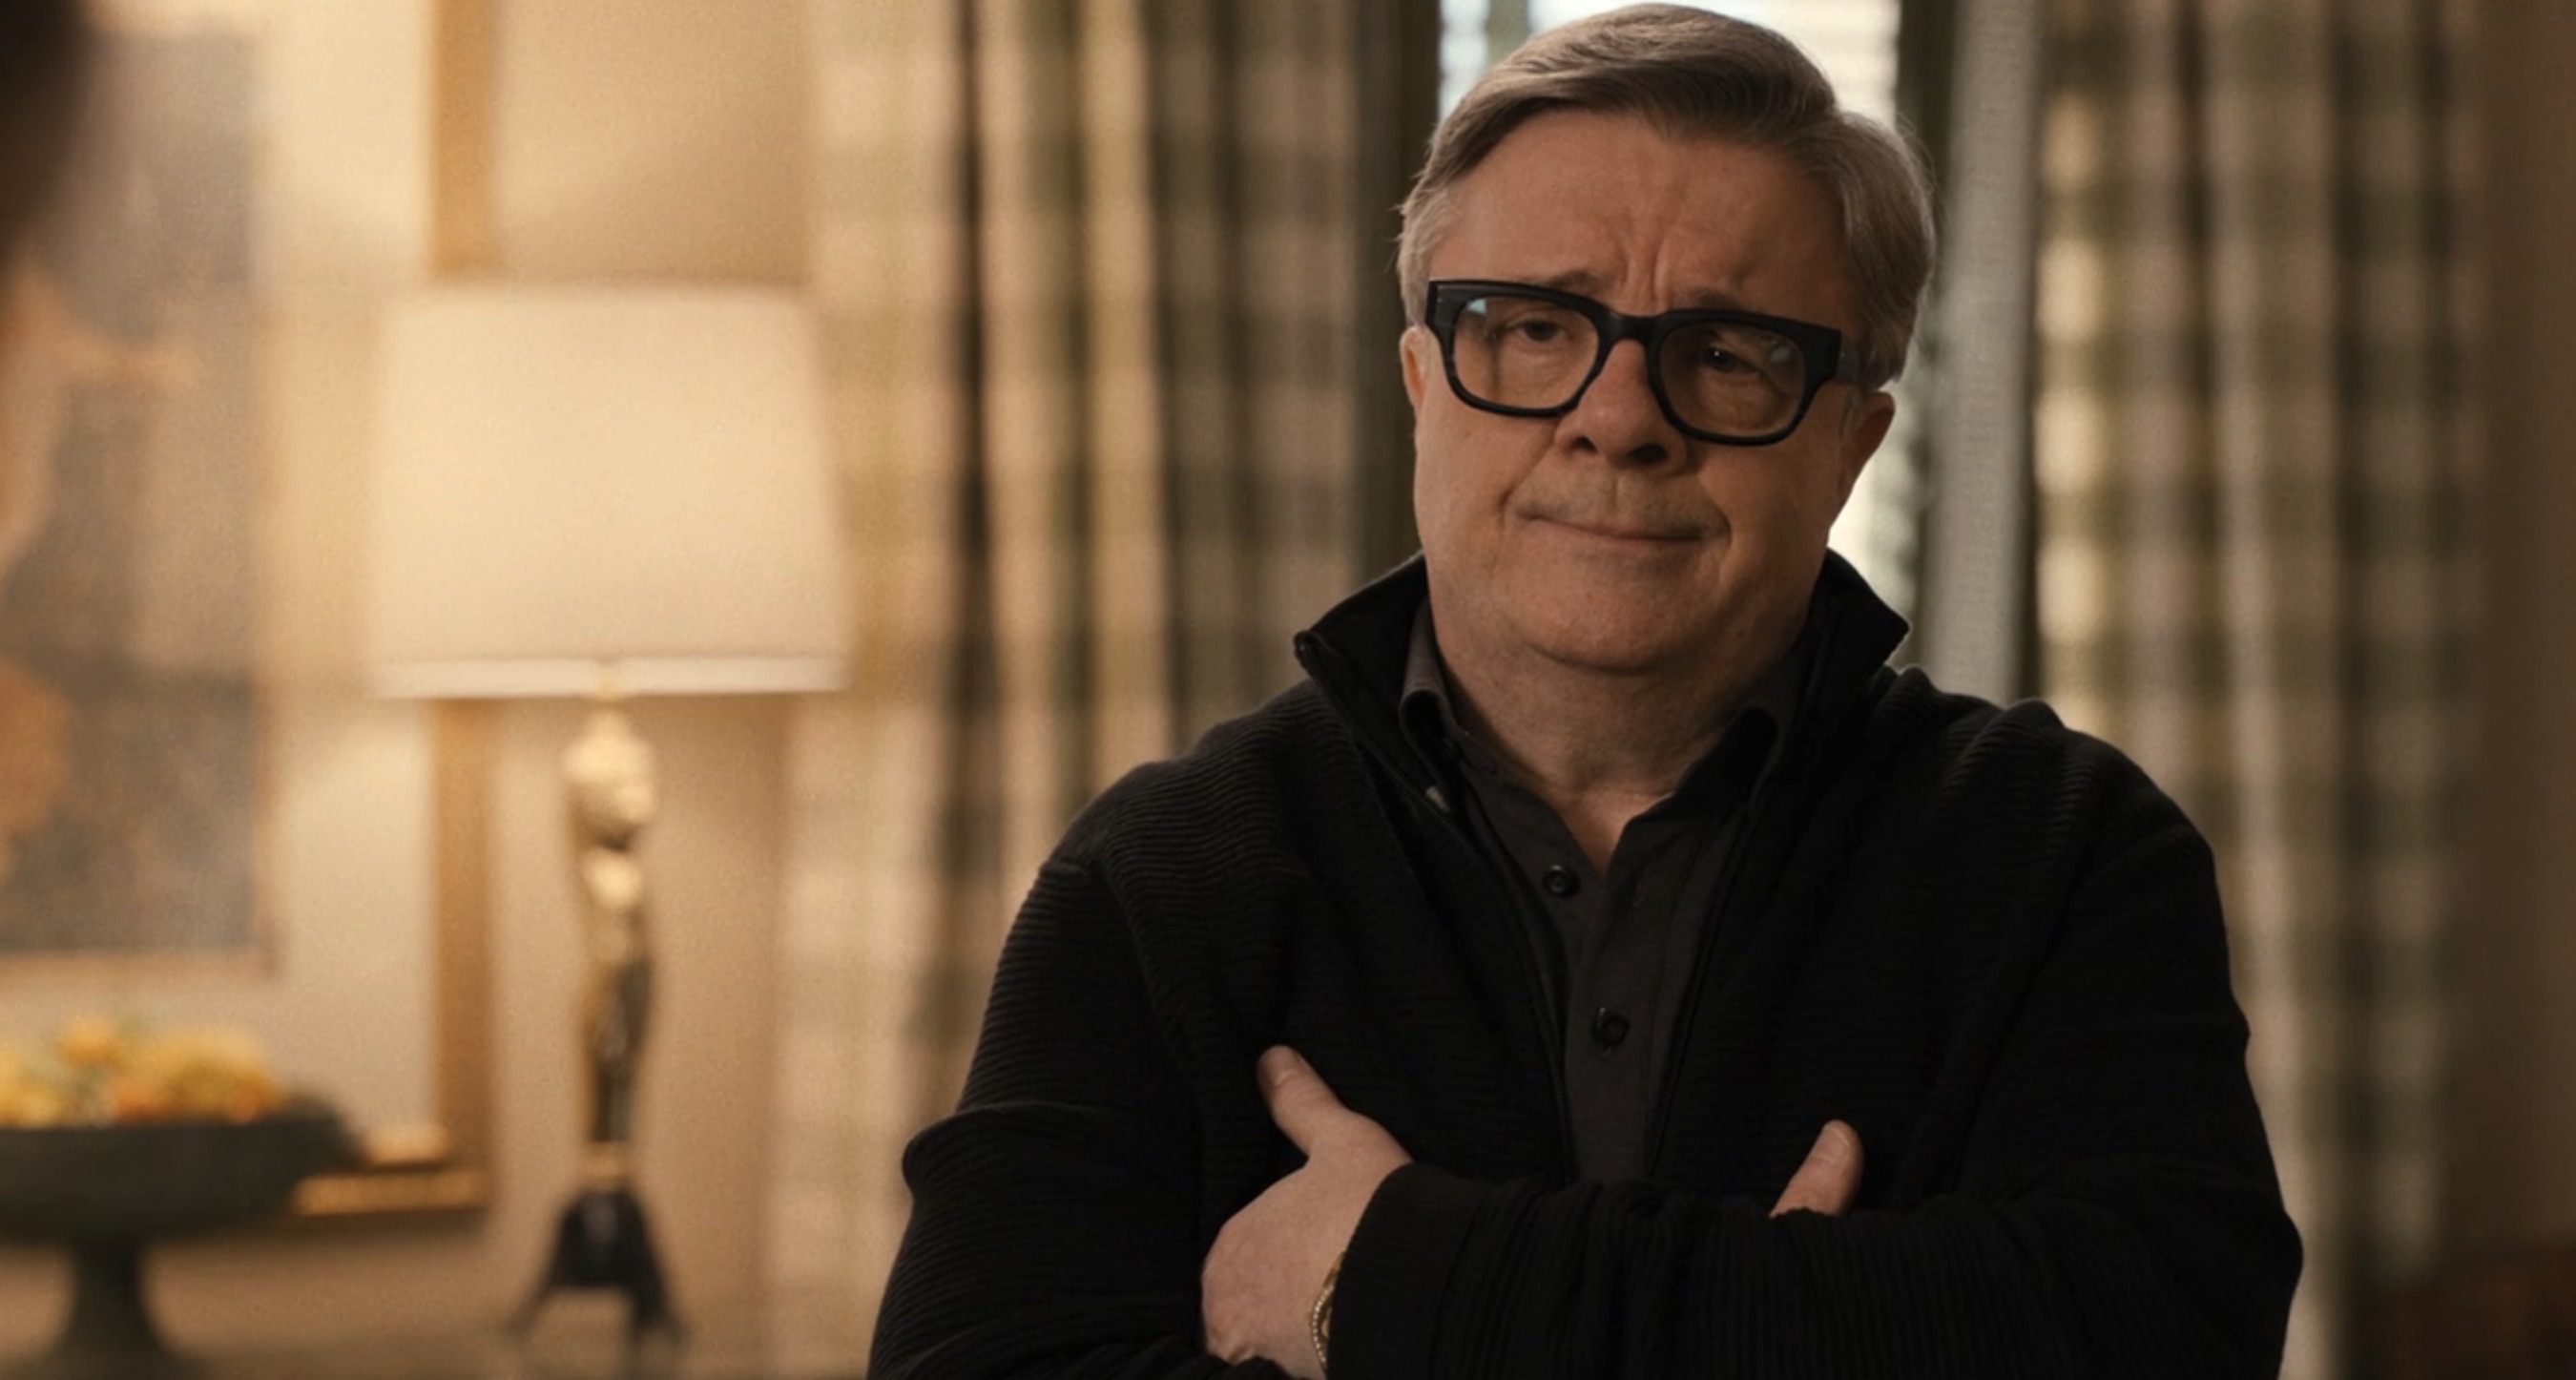 Only Murders in the Building Cast on Hulu - Nathan Lane as Teddy